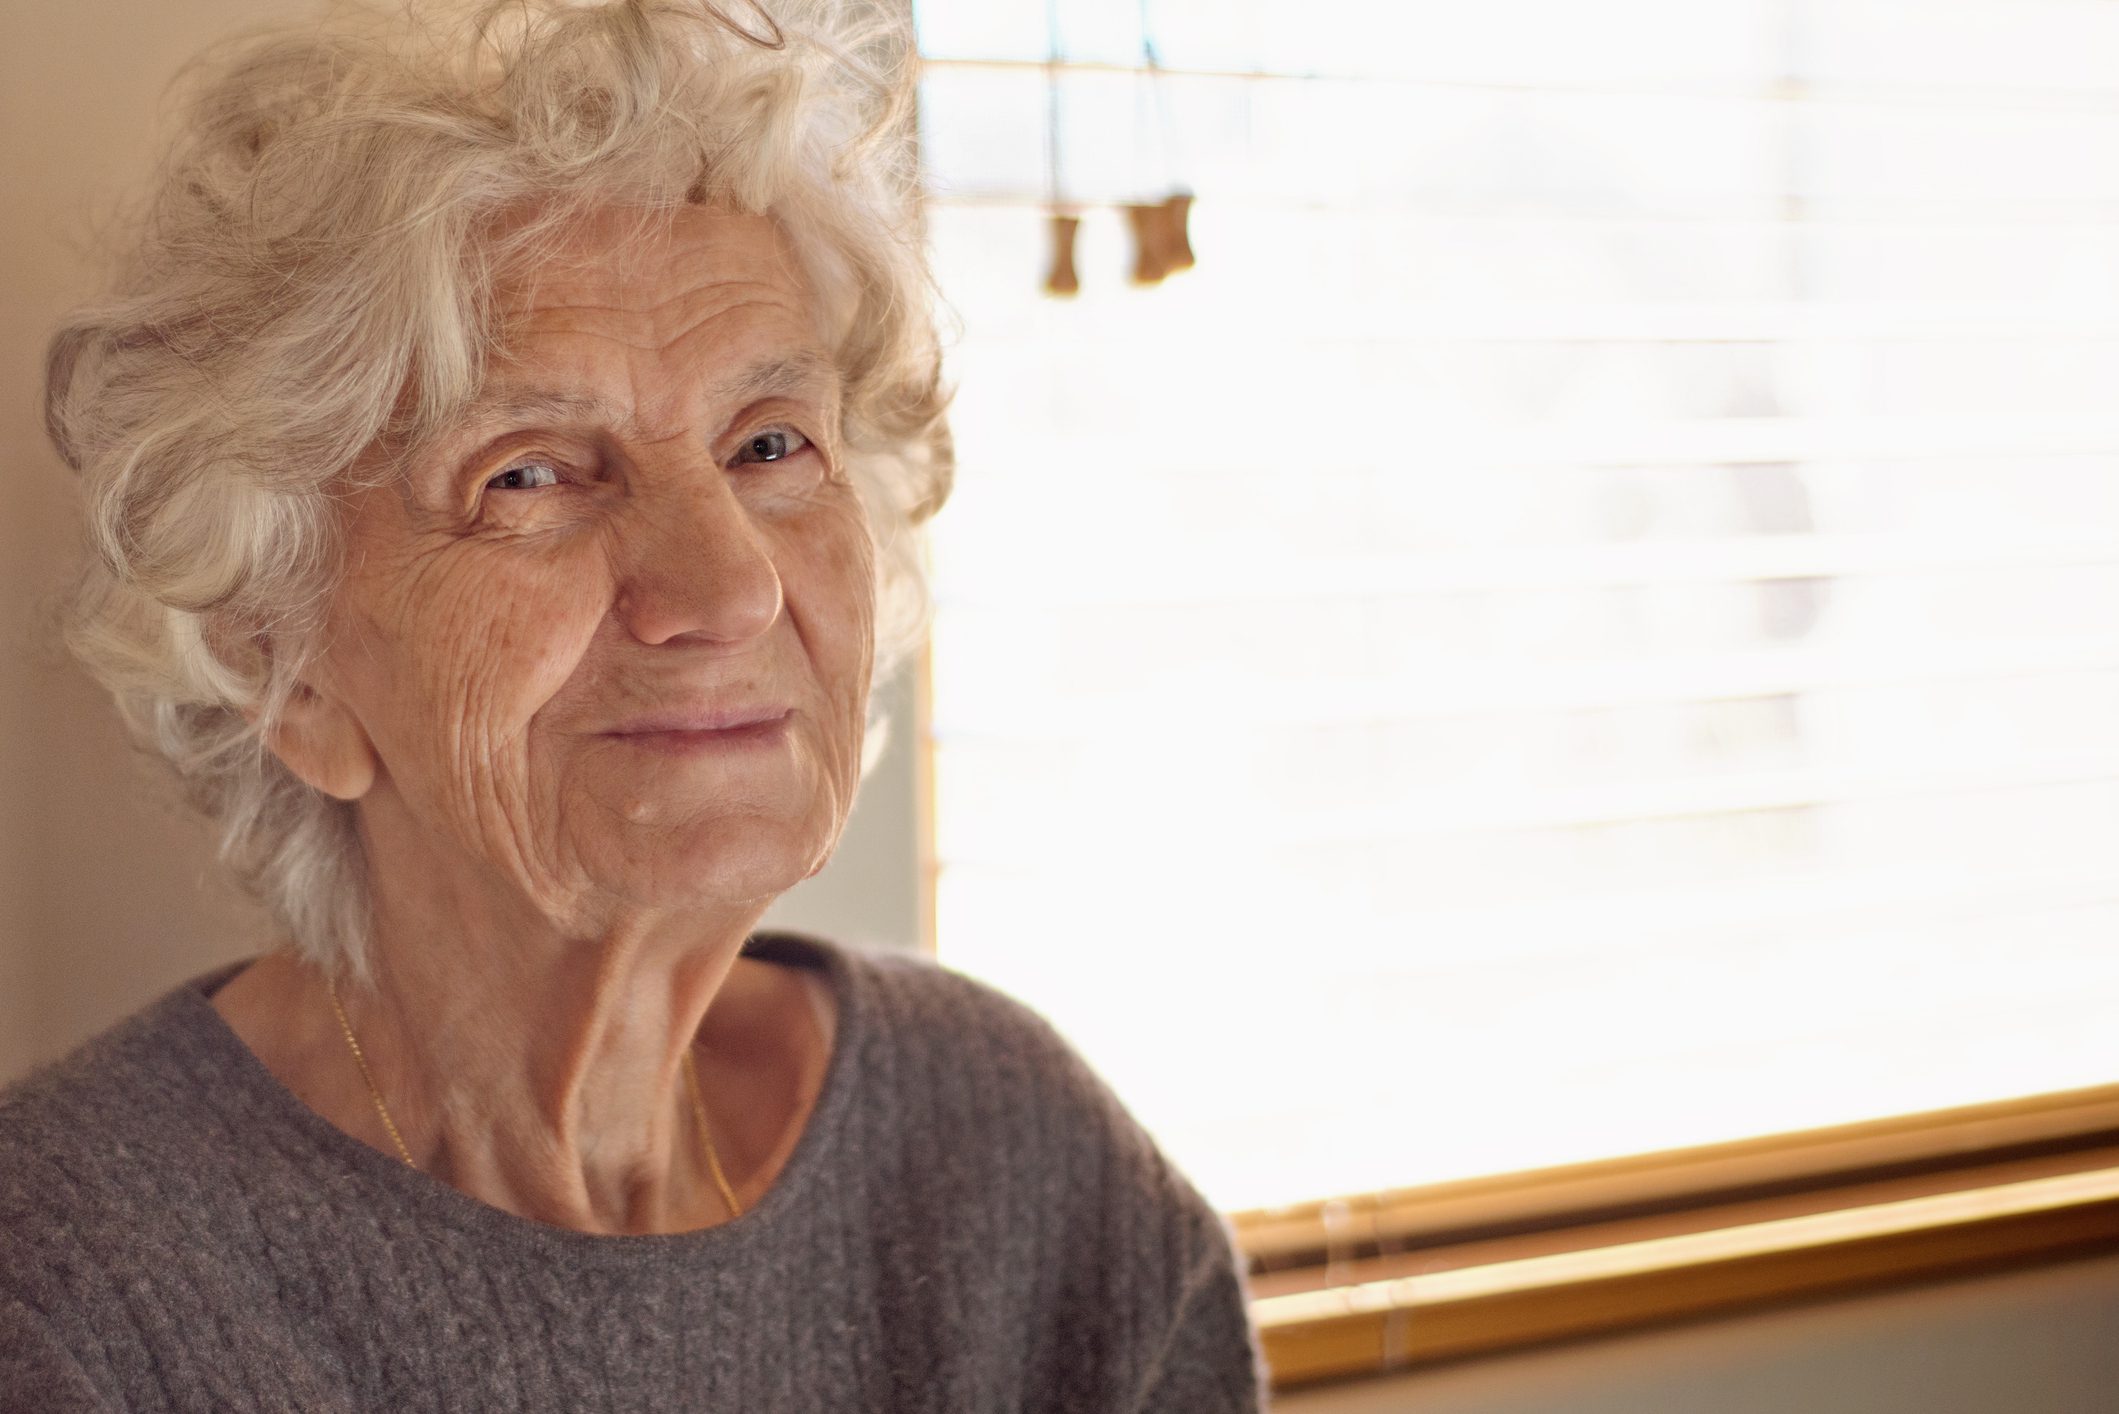 2024 March highlights - stock image of an older woman smiling.